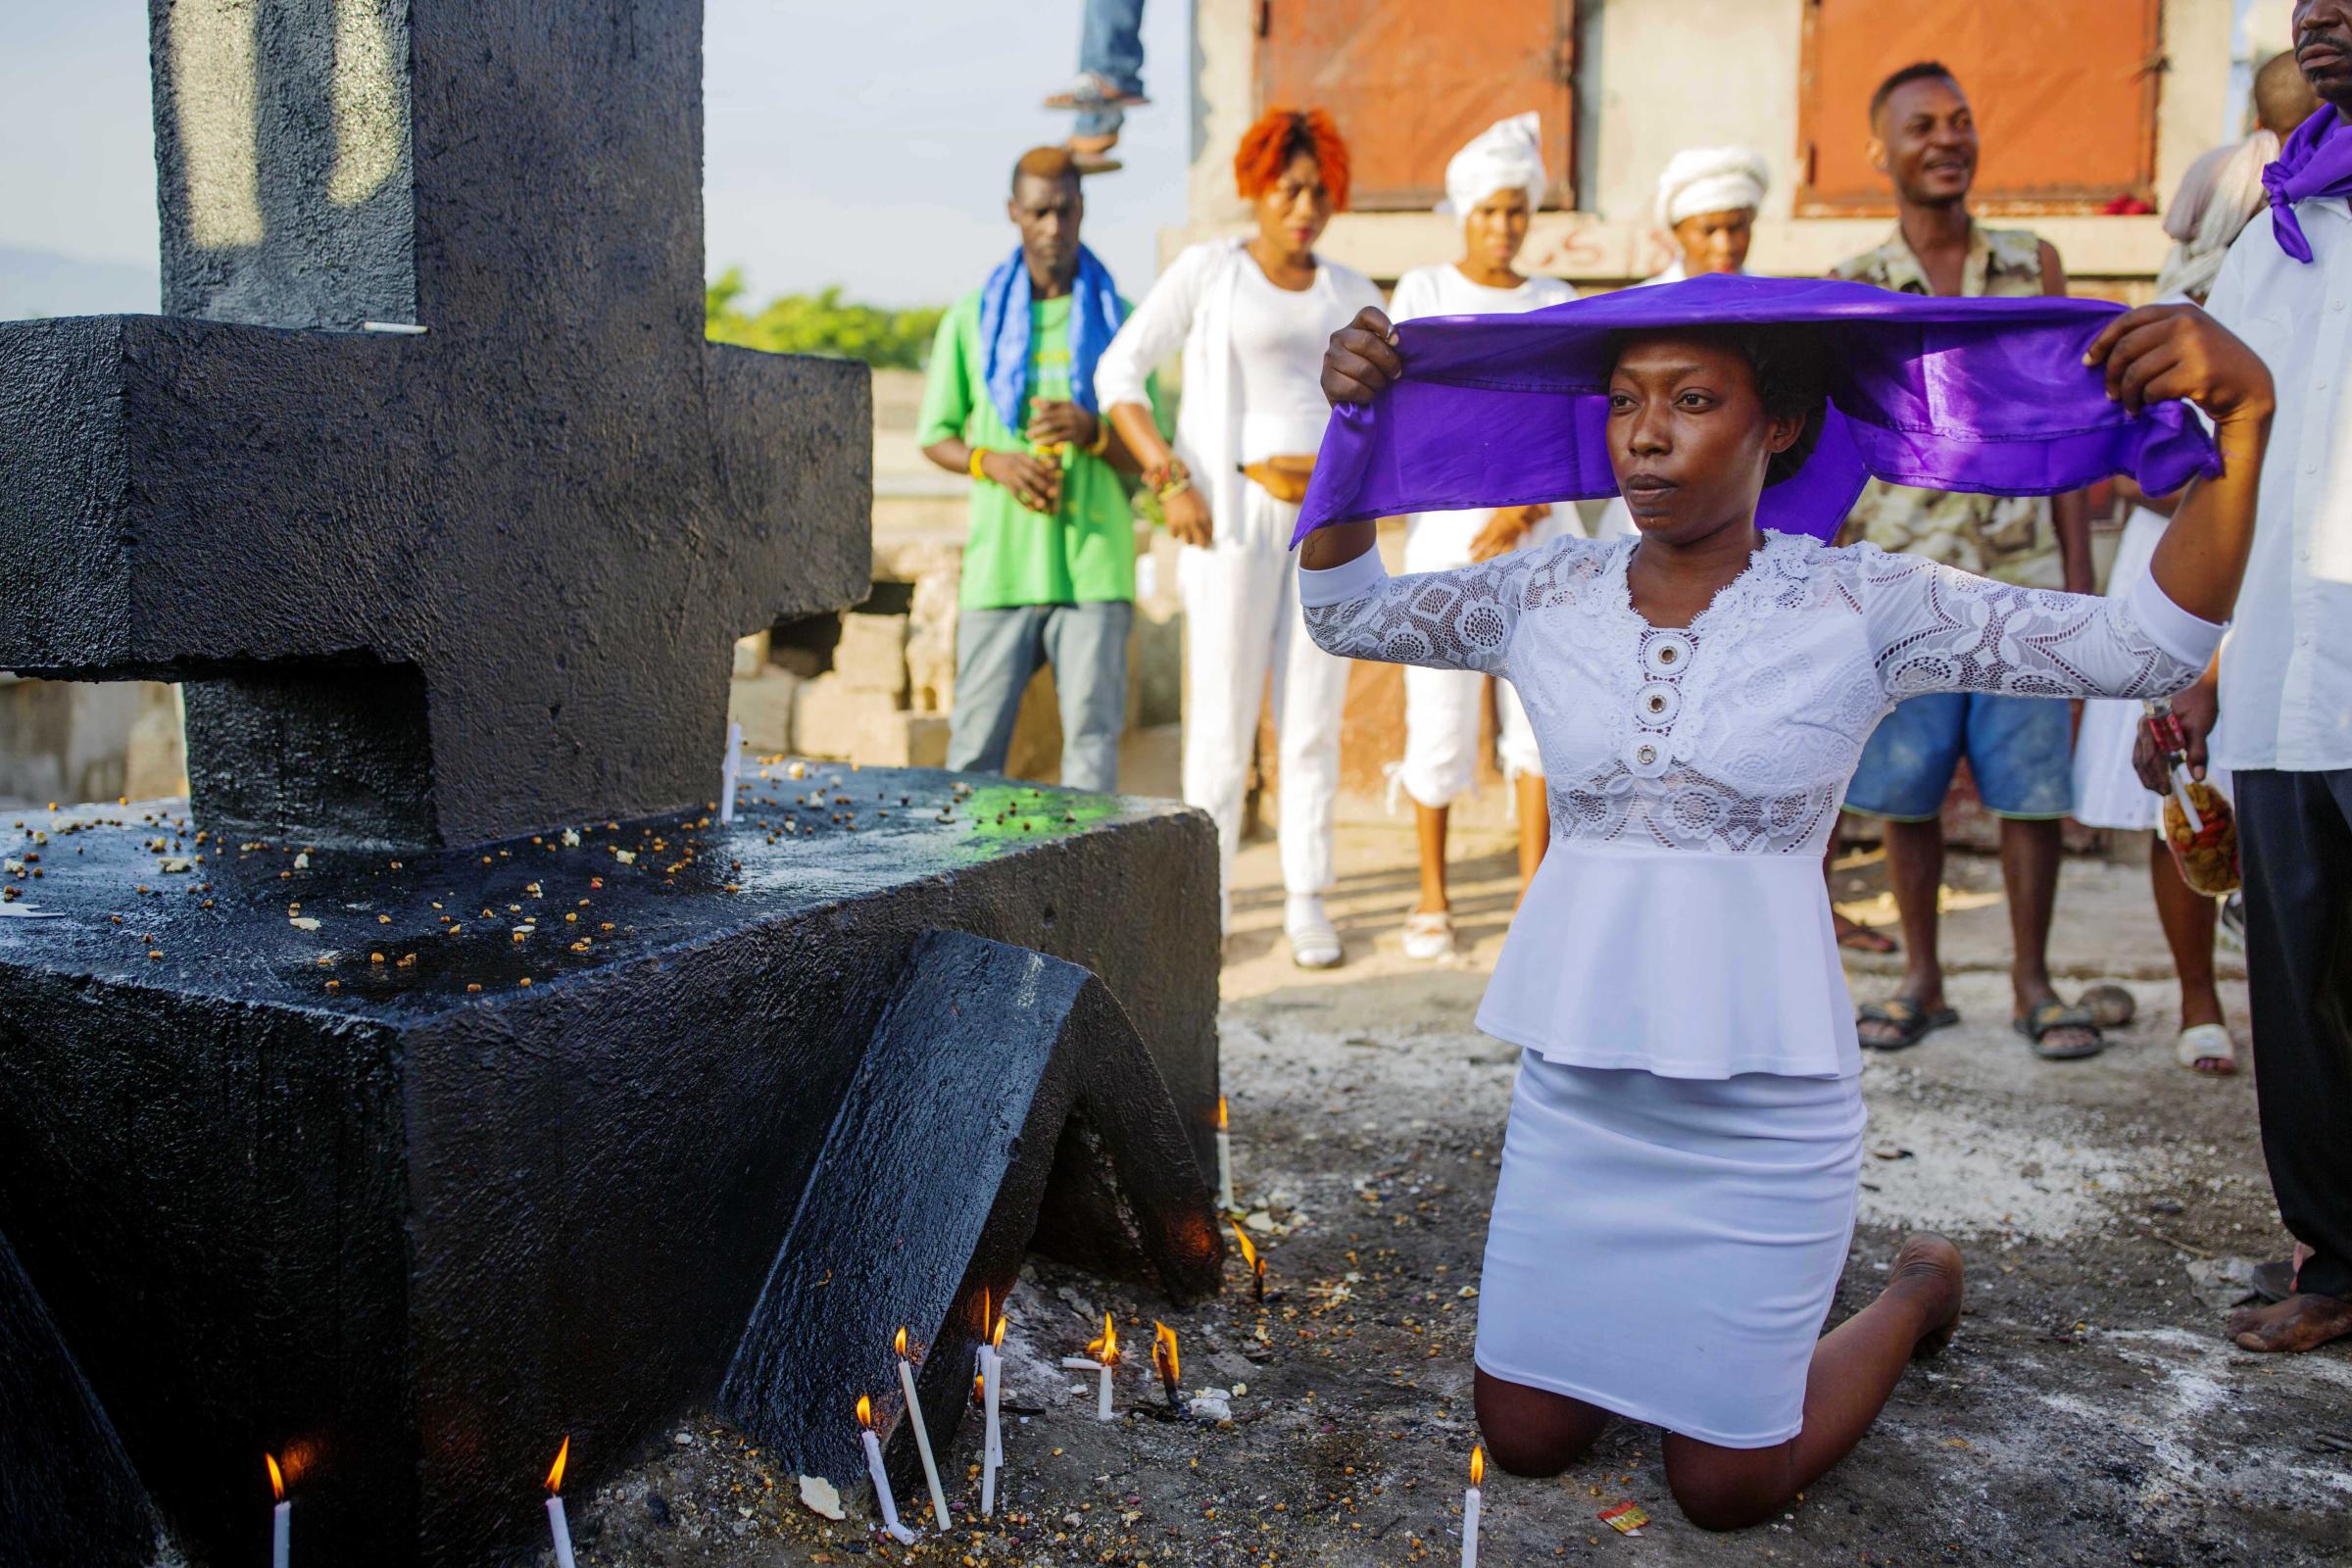 Vodou in Haiti - Vodou believers readying at the Cite Soleil cemetery...